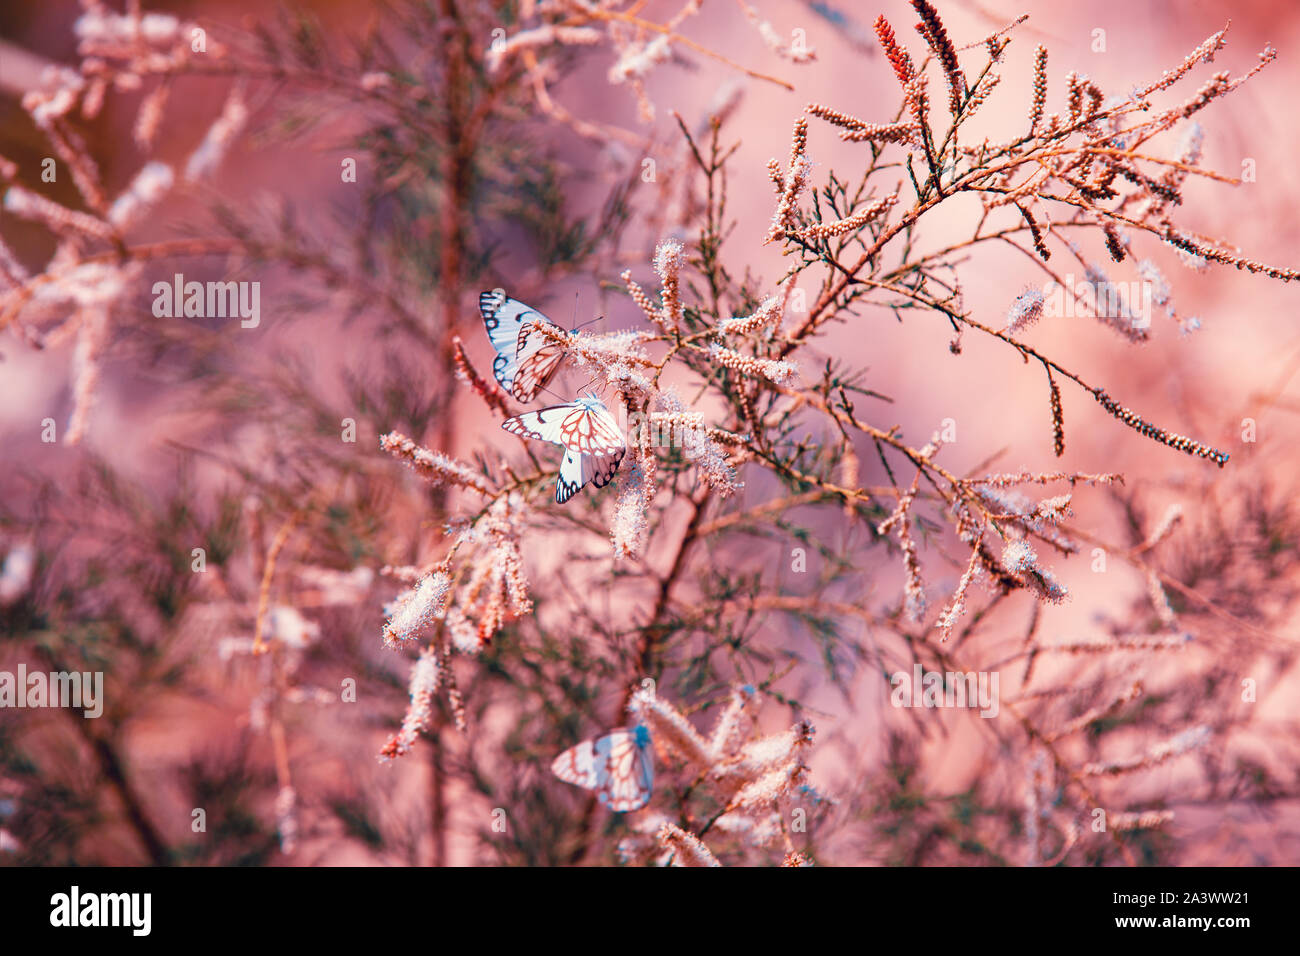 Summer abstract nature background. Branches with butterflies Stock Photo